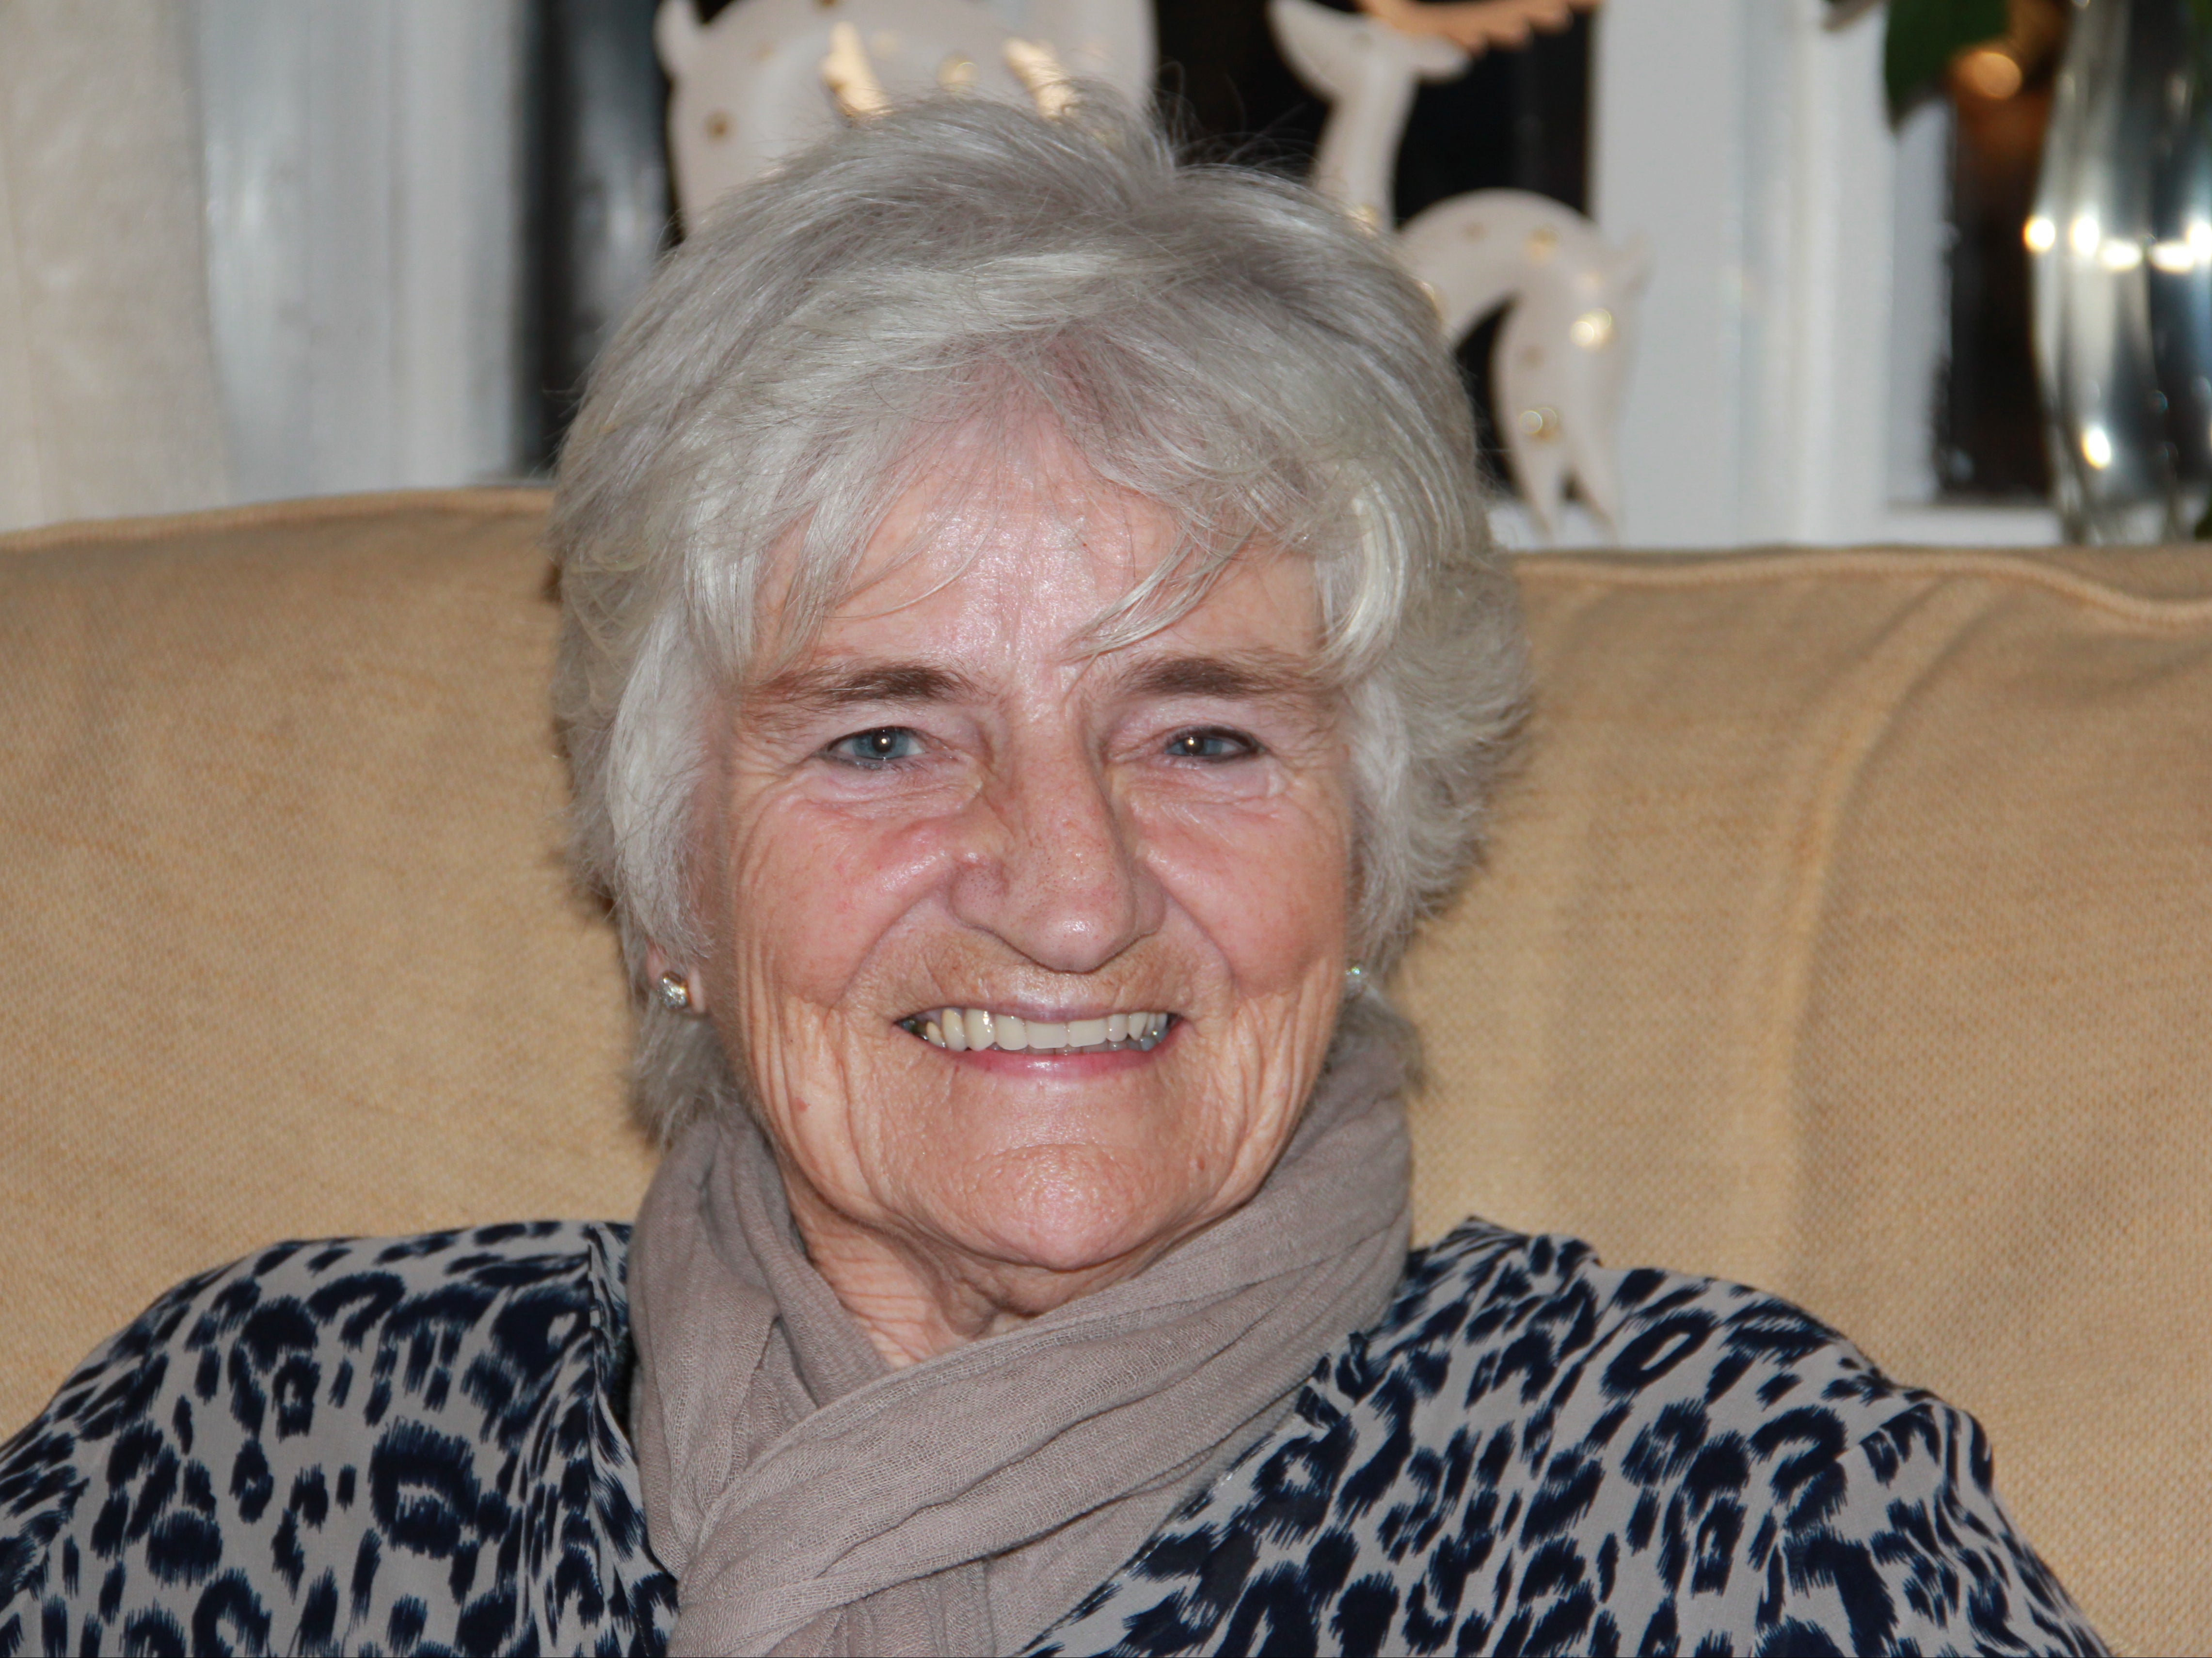 Sylvia Jackson, who suffered from dementia, died at her care home aged 87 in April 2020